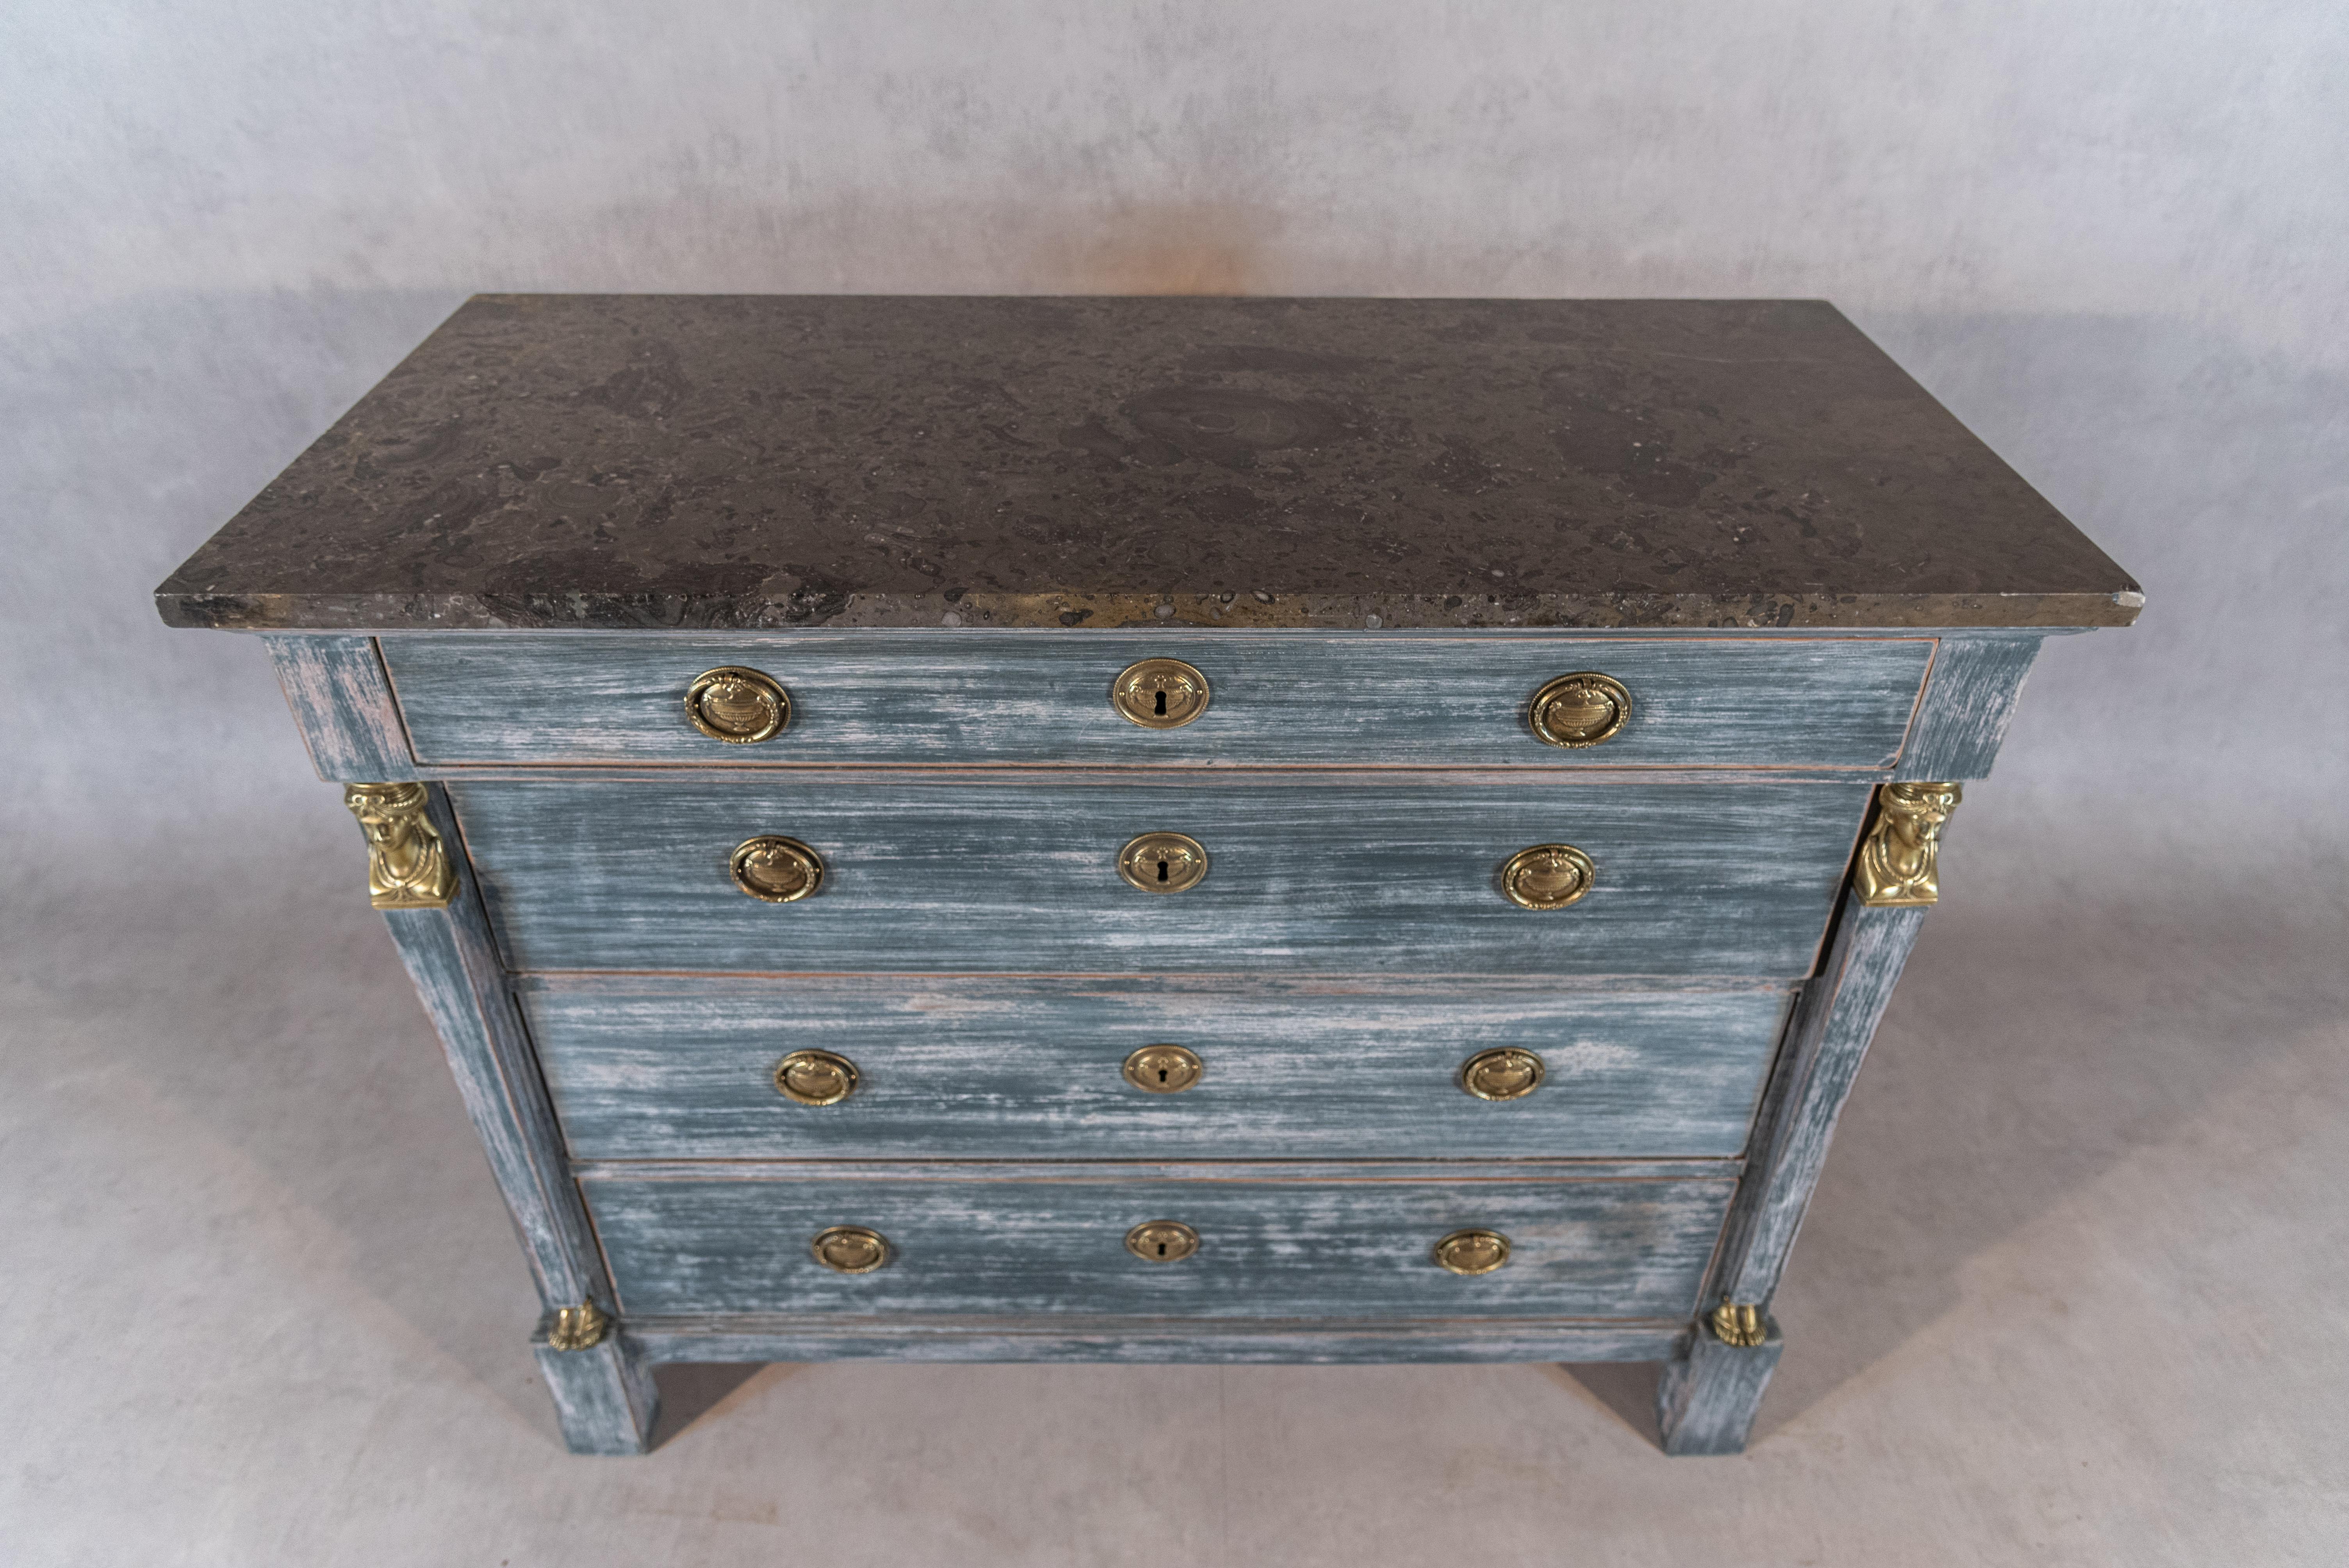 Step into the fascinating world of the French Egyptian Revival Period with this gorgeous commode, a stunning piece that reflects the allure of ancient Egypt. The commode's unique patina adds a sense of history and character, telling a story of its